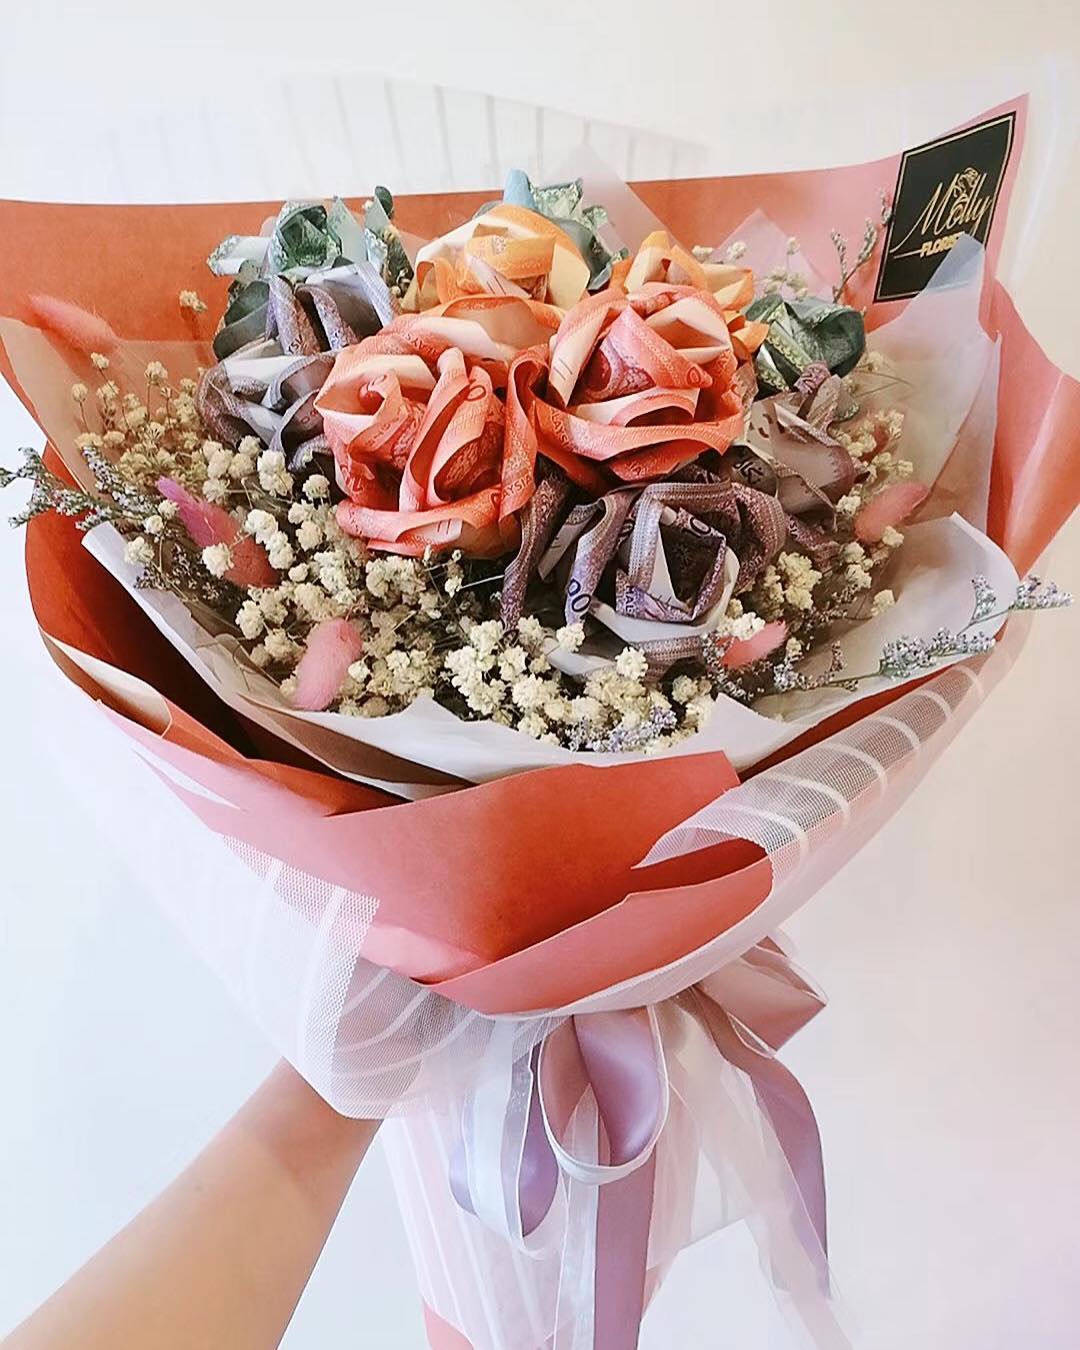 X Unique Bouquets You Can Get In KL This Valentines Day - WORLD OF BUZZ 8